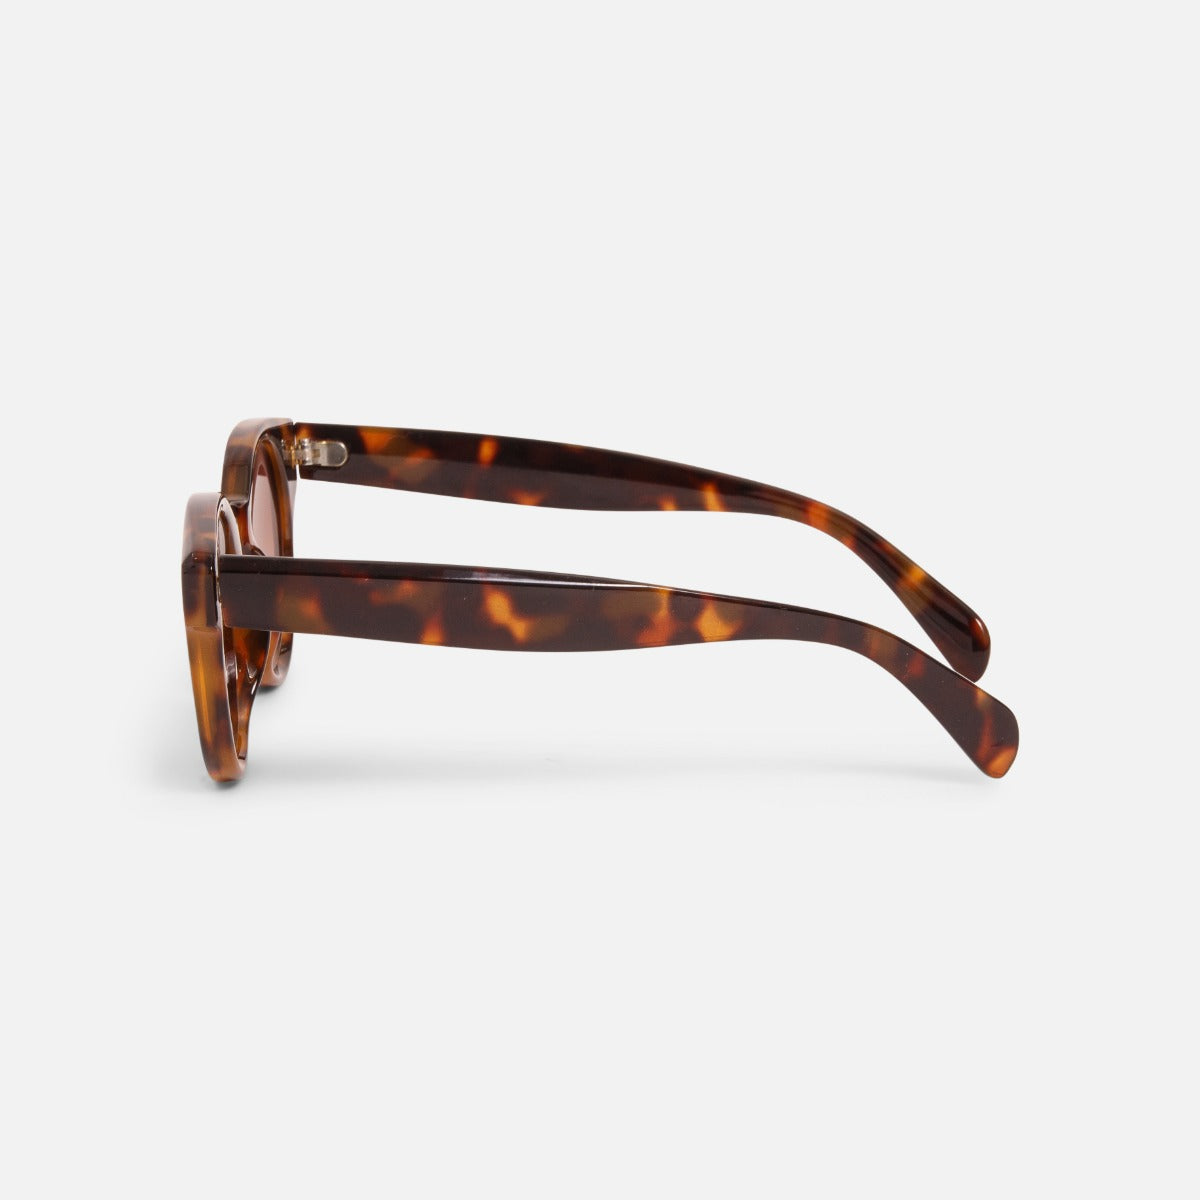 Round sunglasses with tortoise frame